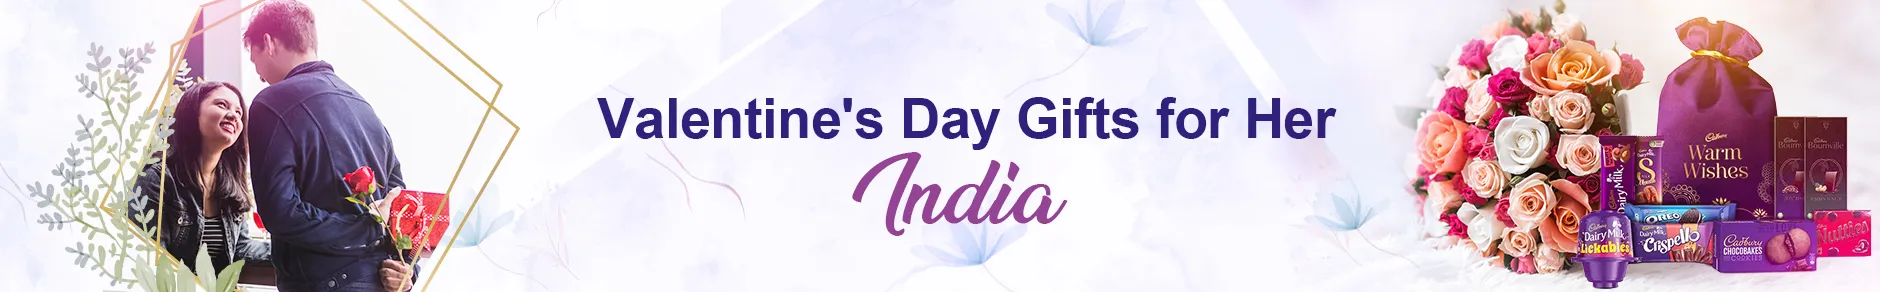 Gifts for Women in Hazira | Send Flowers, Cake & Gift Hampers in 2 Hours | Same Day Delivery, Free Shipping